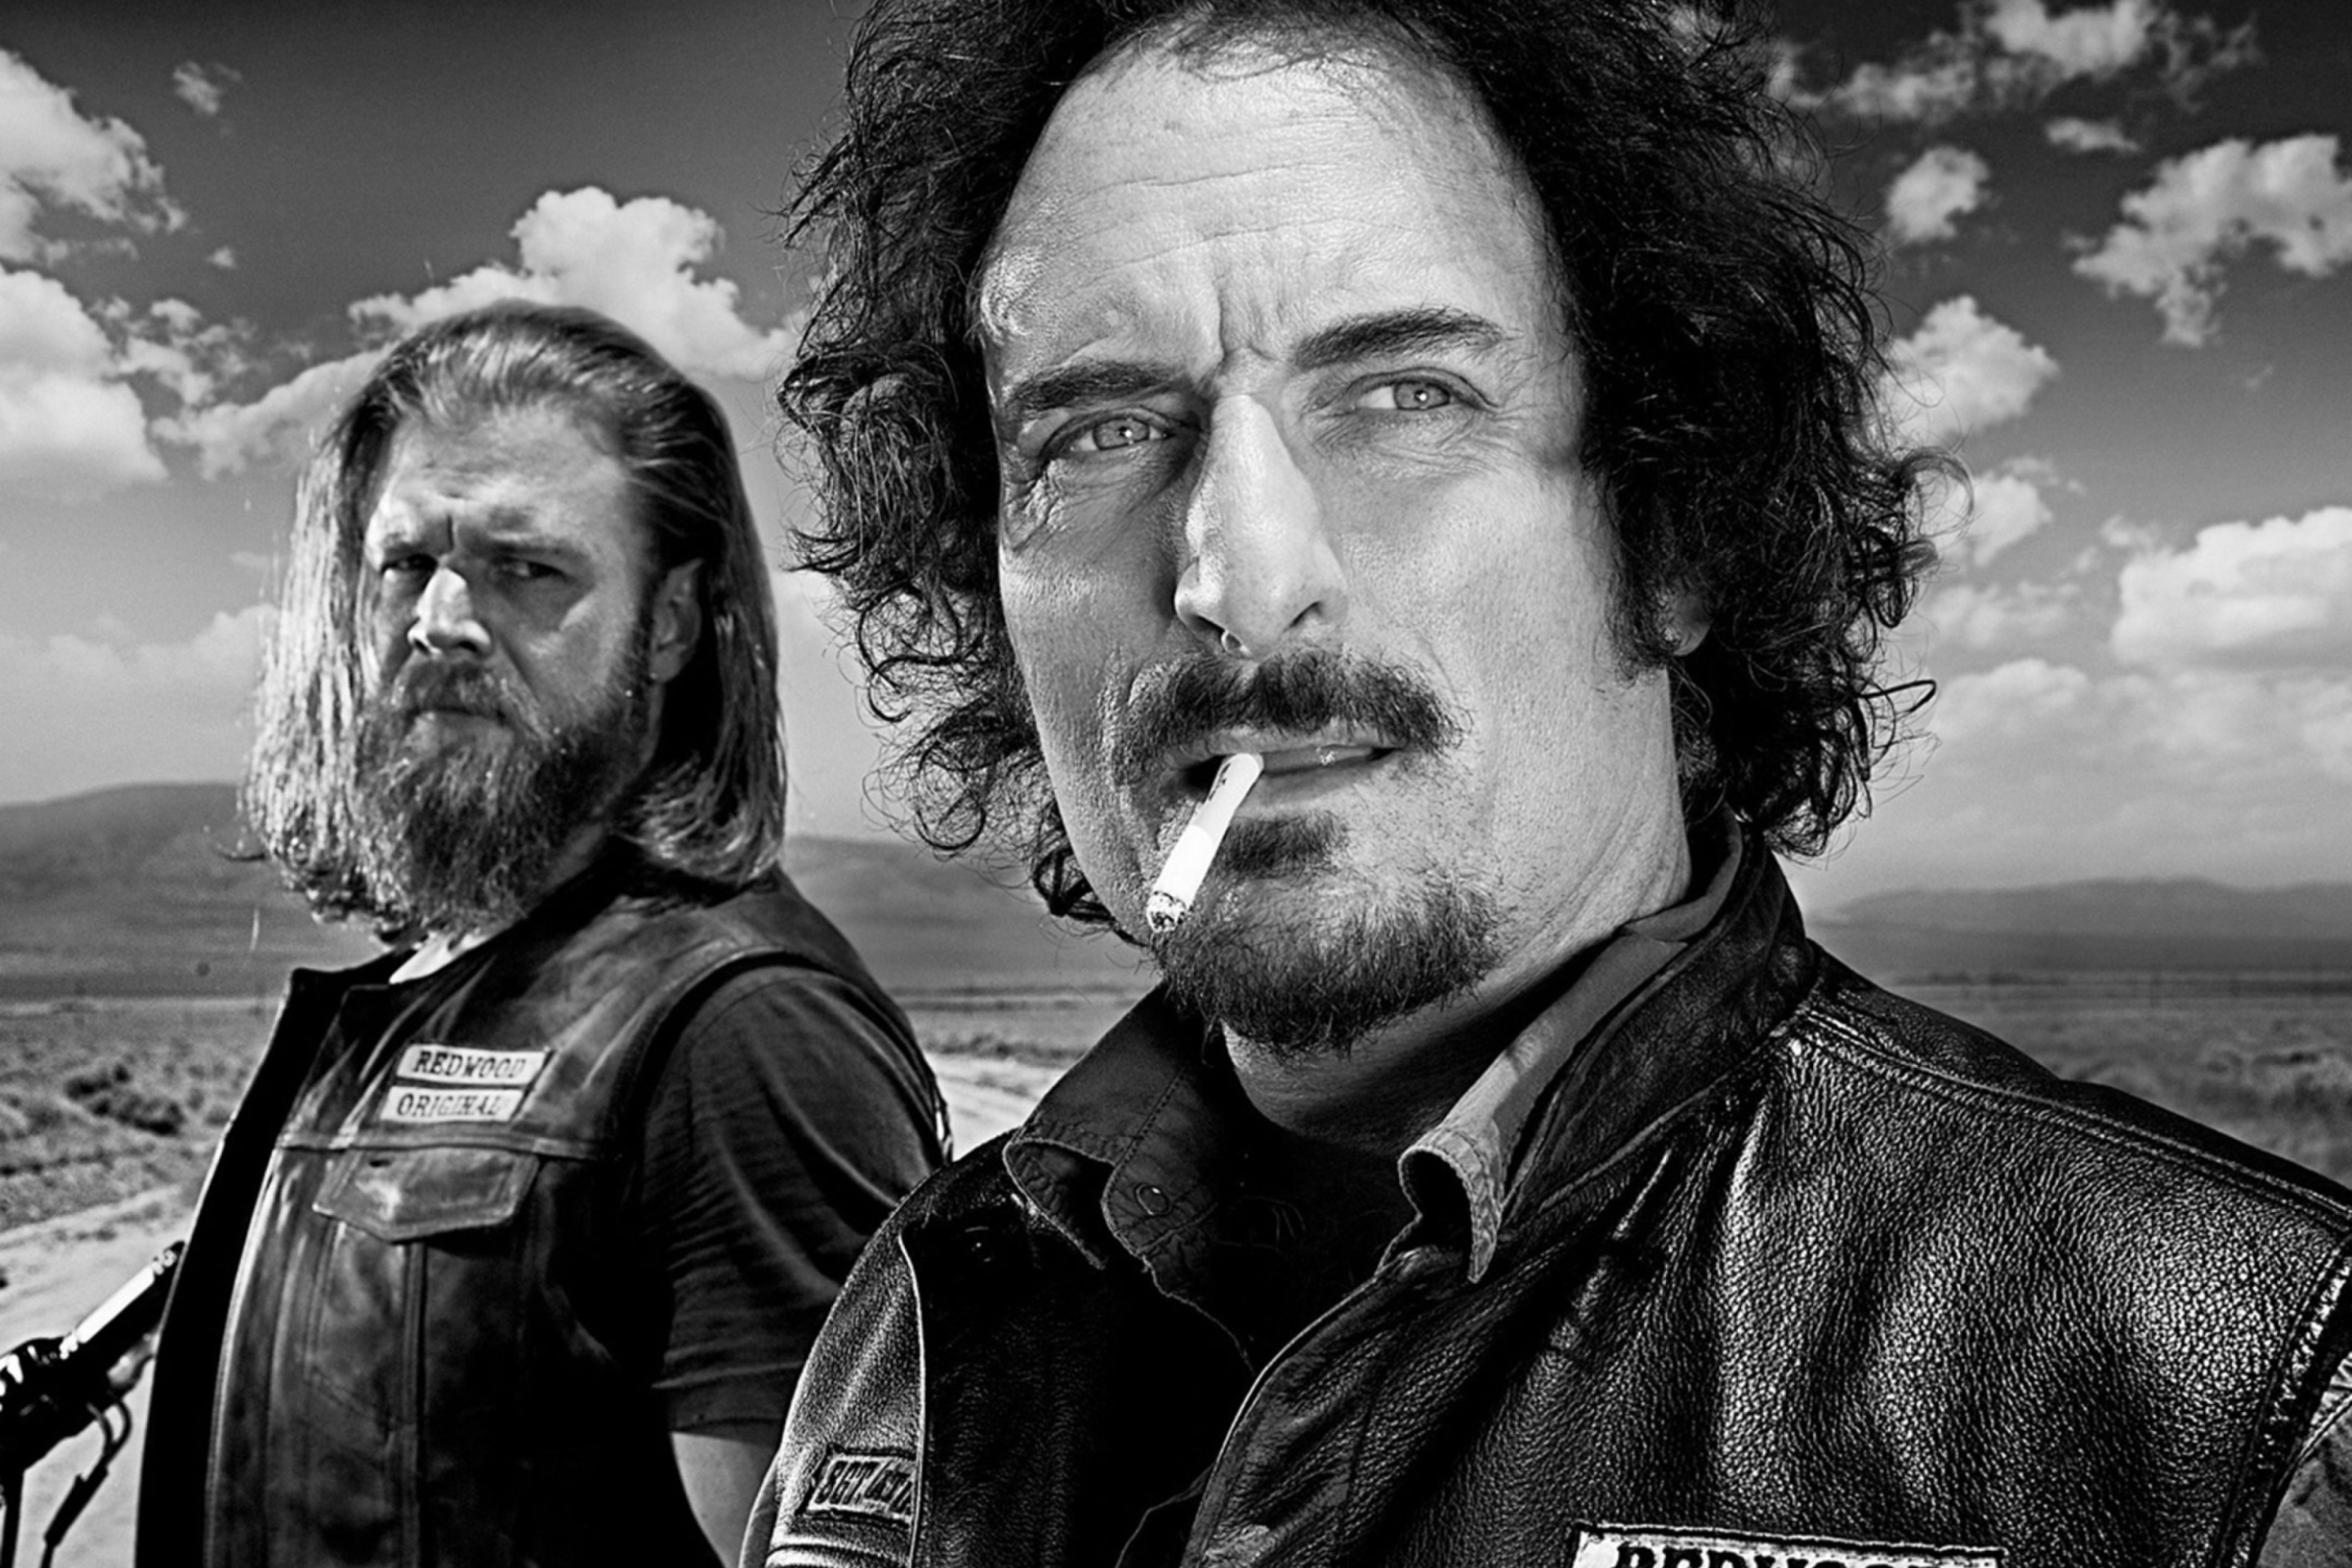 Opie and Tig in Sons of Anarchy wallpaper 2880x1920